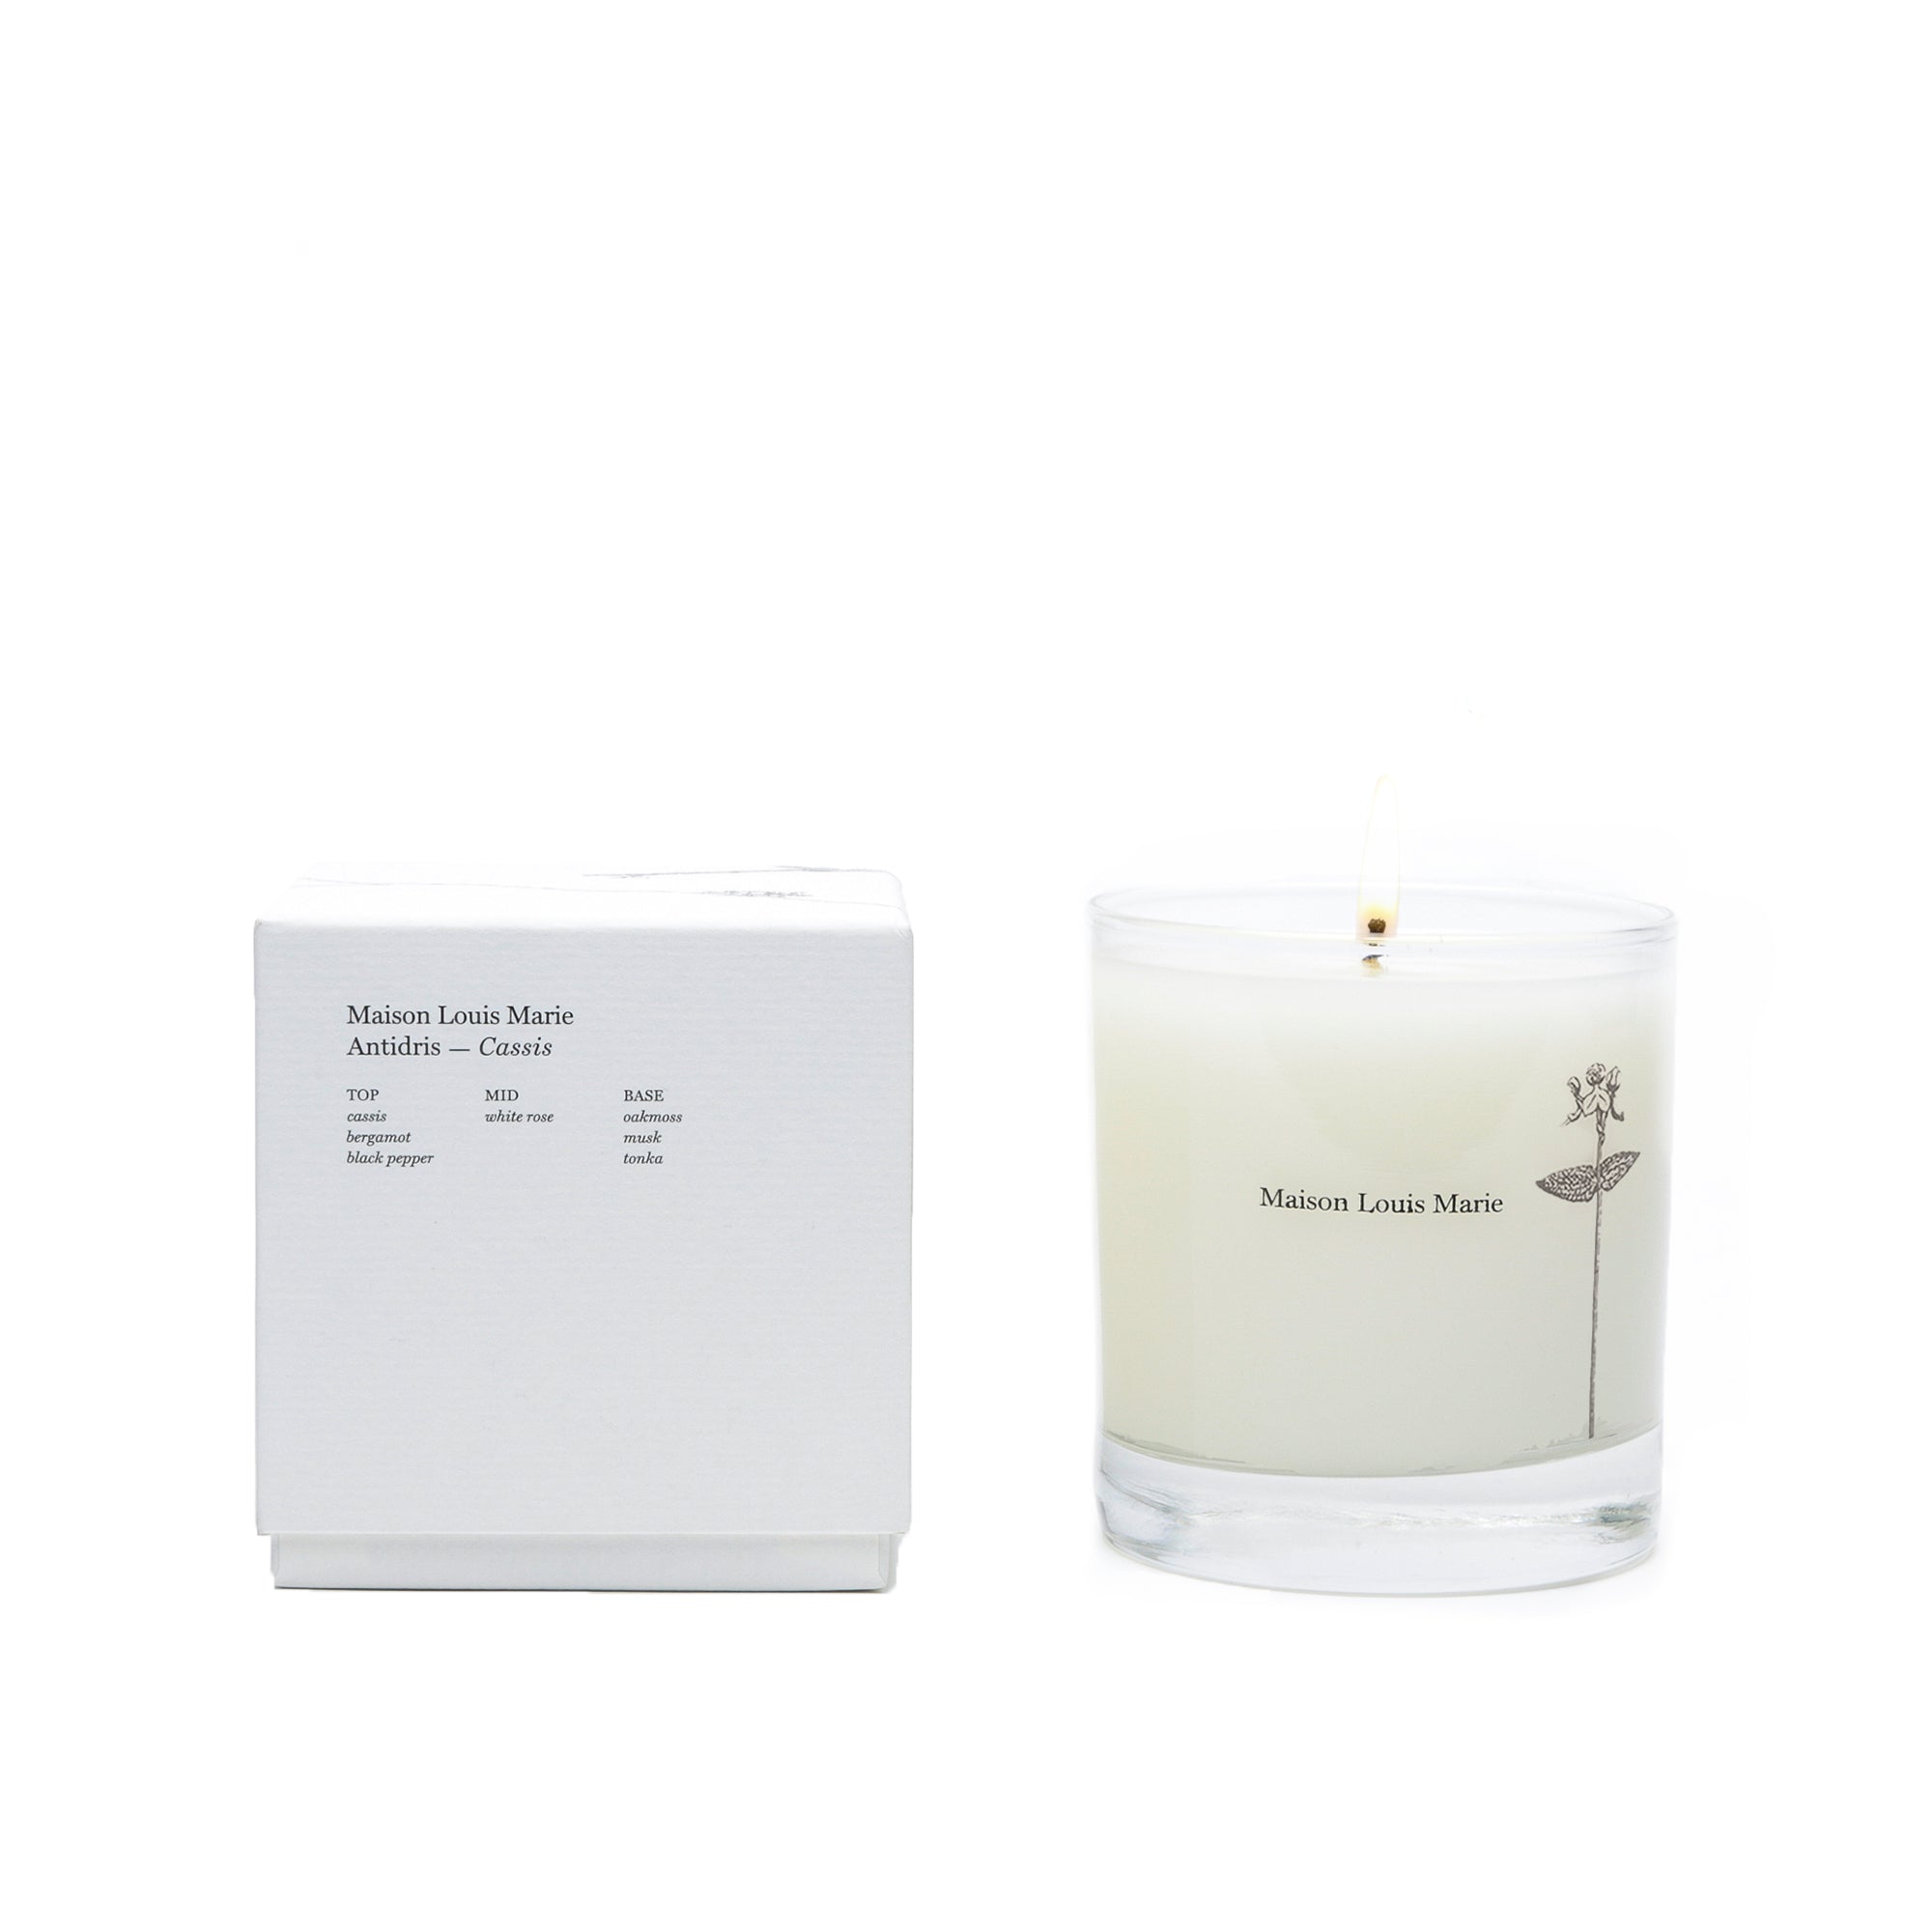 Candle Antidris Cassis